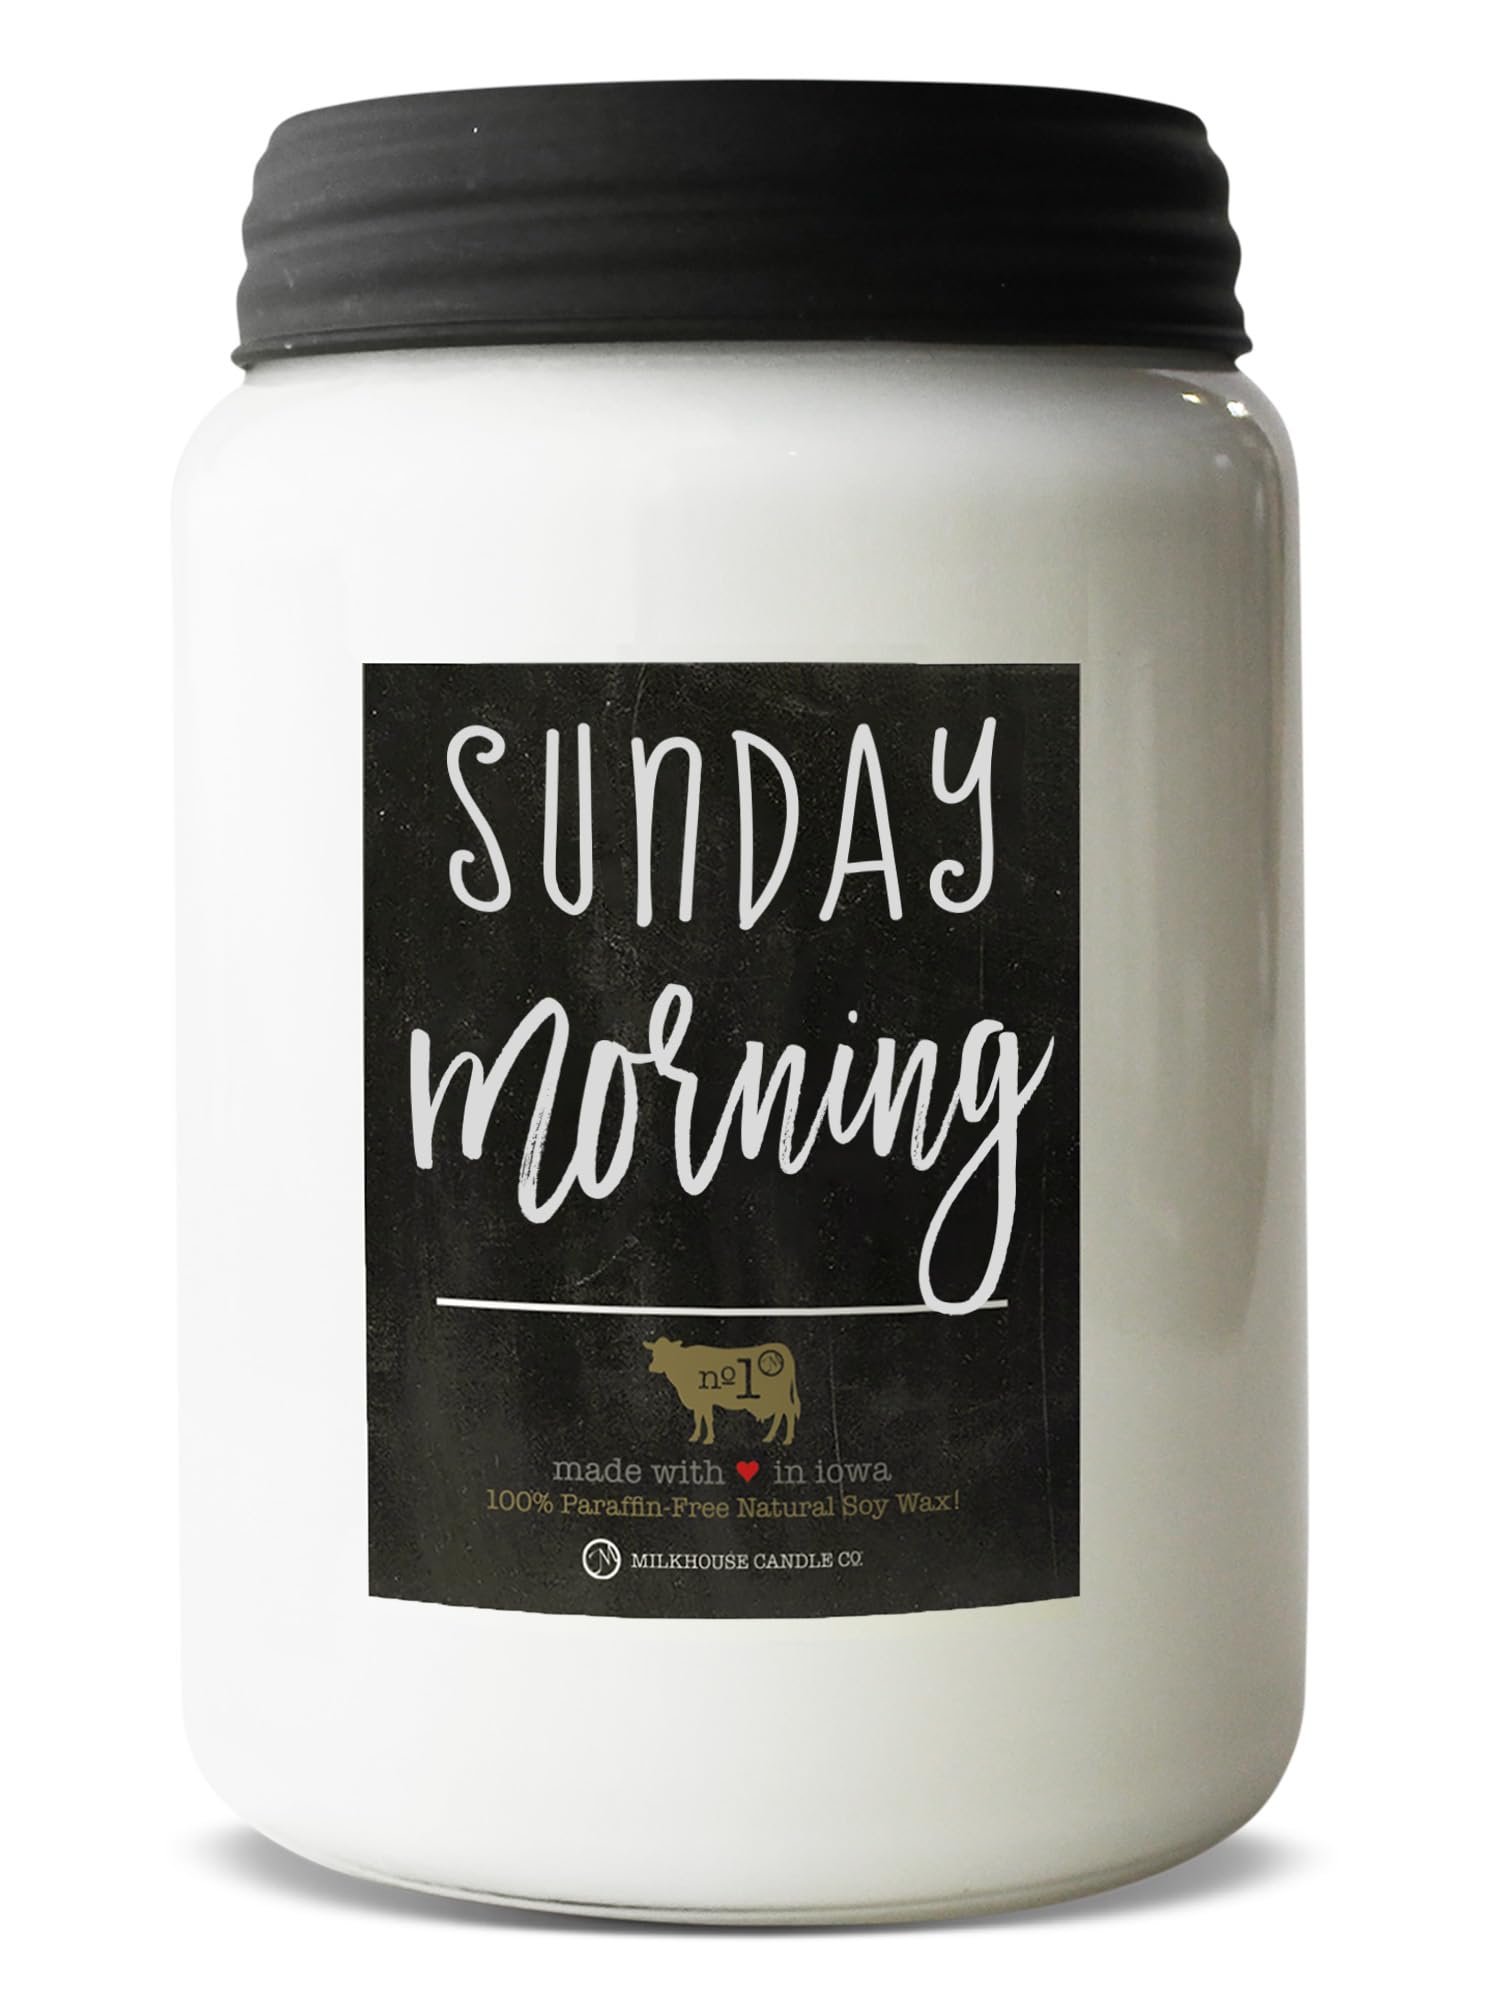 Milkhouse Candle Company - Sunday Morning - 26oz Beeswax and Soy Candles - Farmhouse Collection - 100% Natural, Paraffin Free, with Premium Fragrance Oil, Glass Jars with Lids